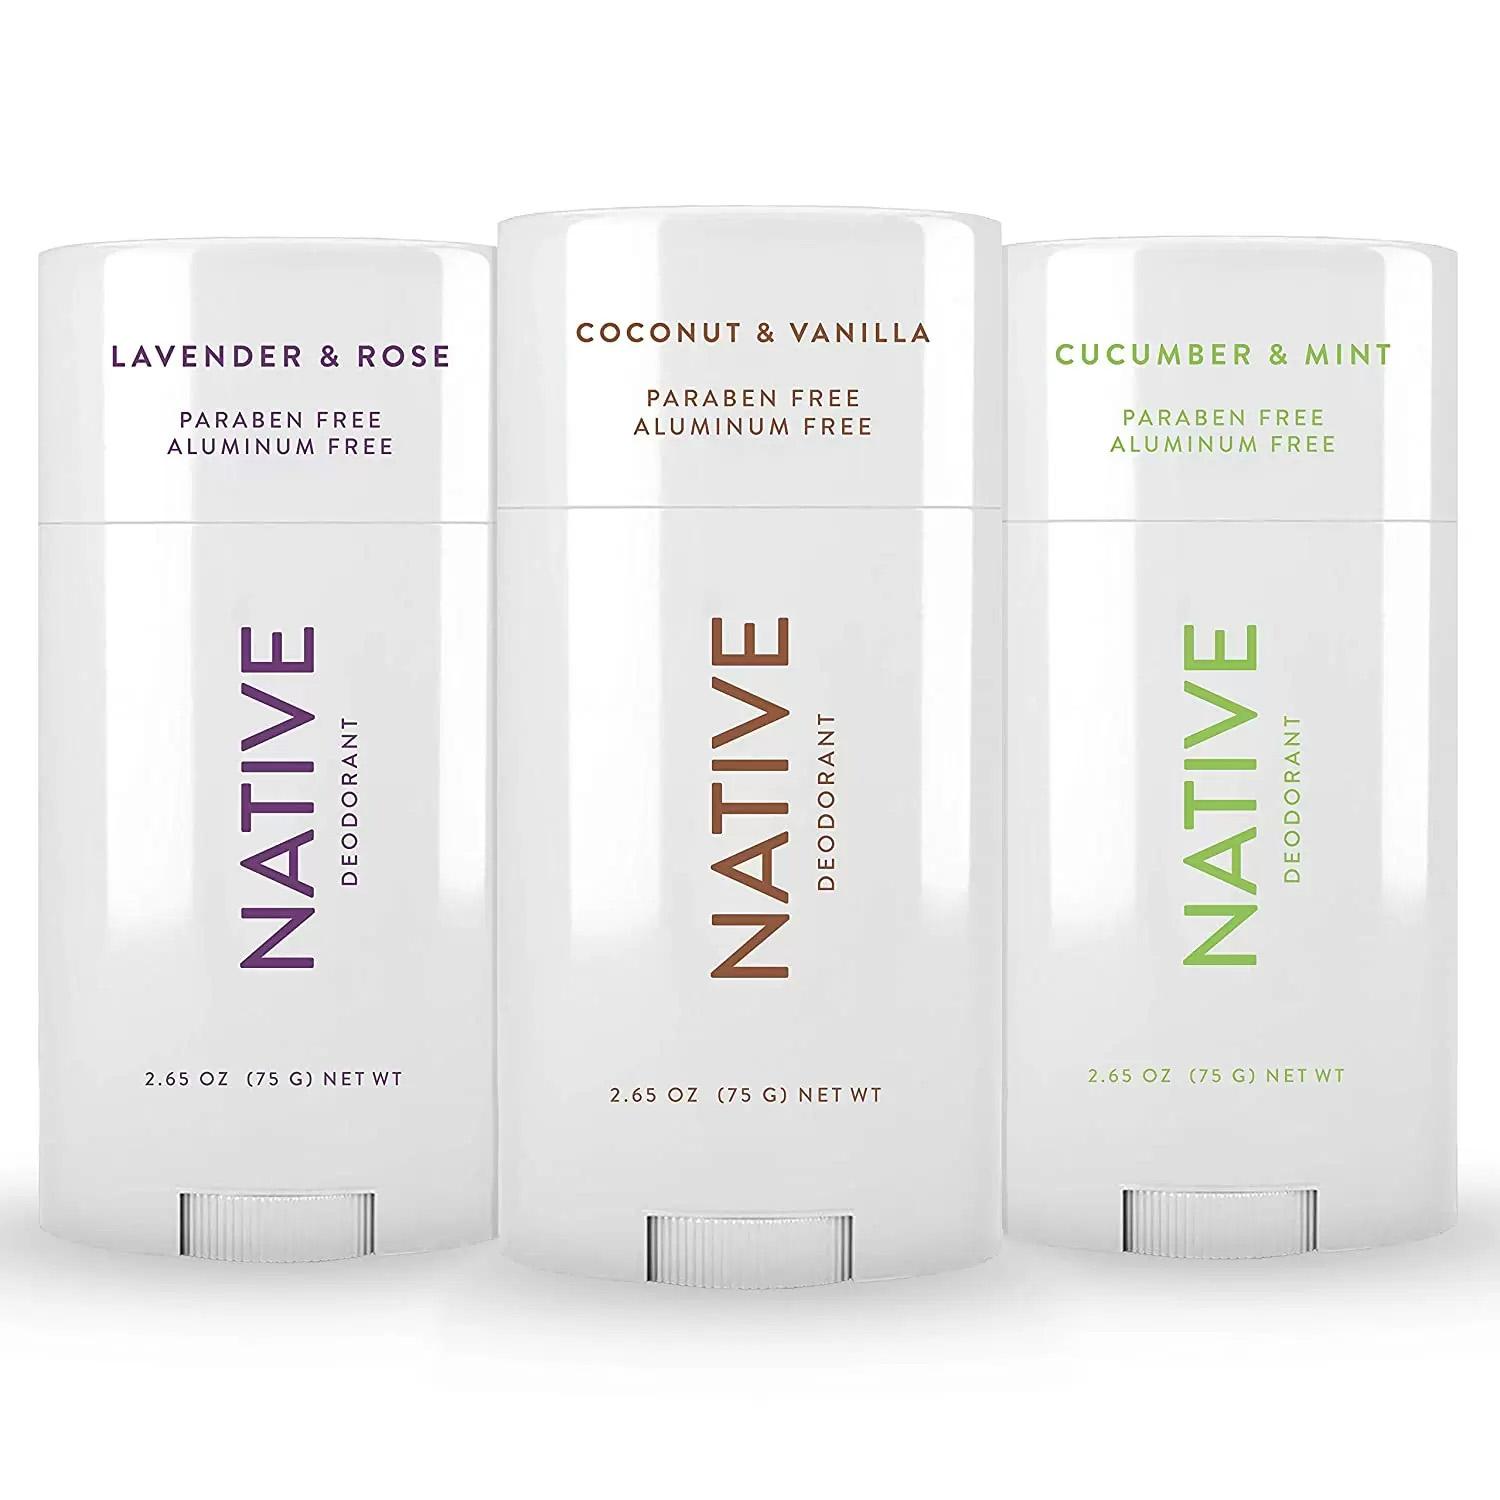 3 Native Natural Deodorants for $23.94 Shipped